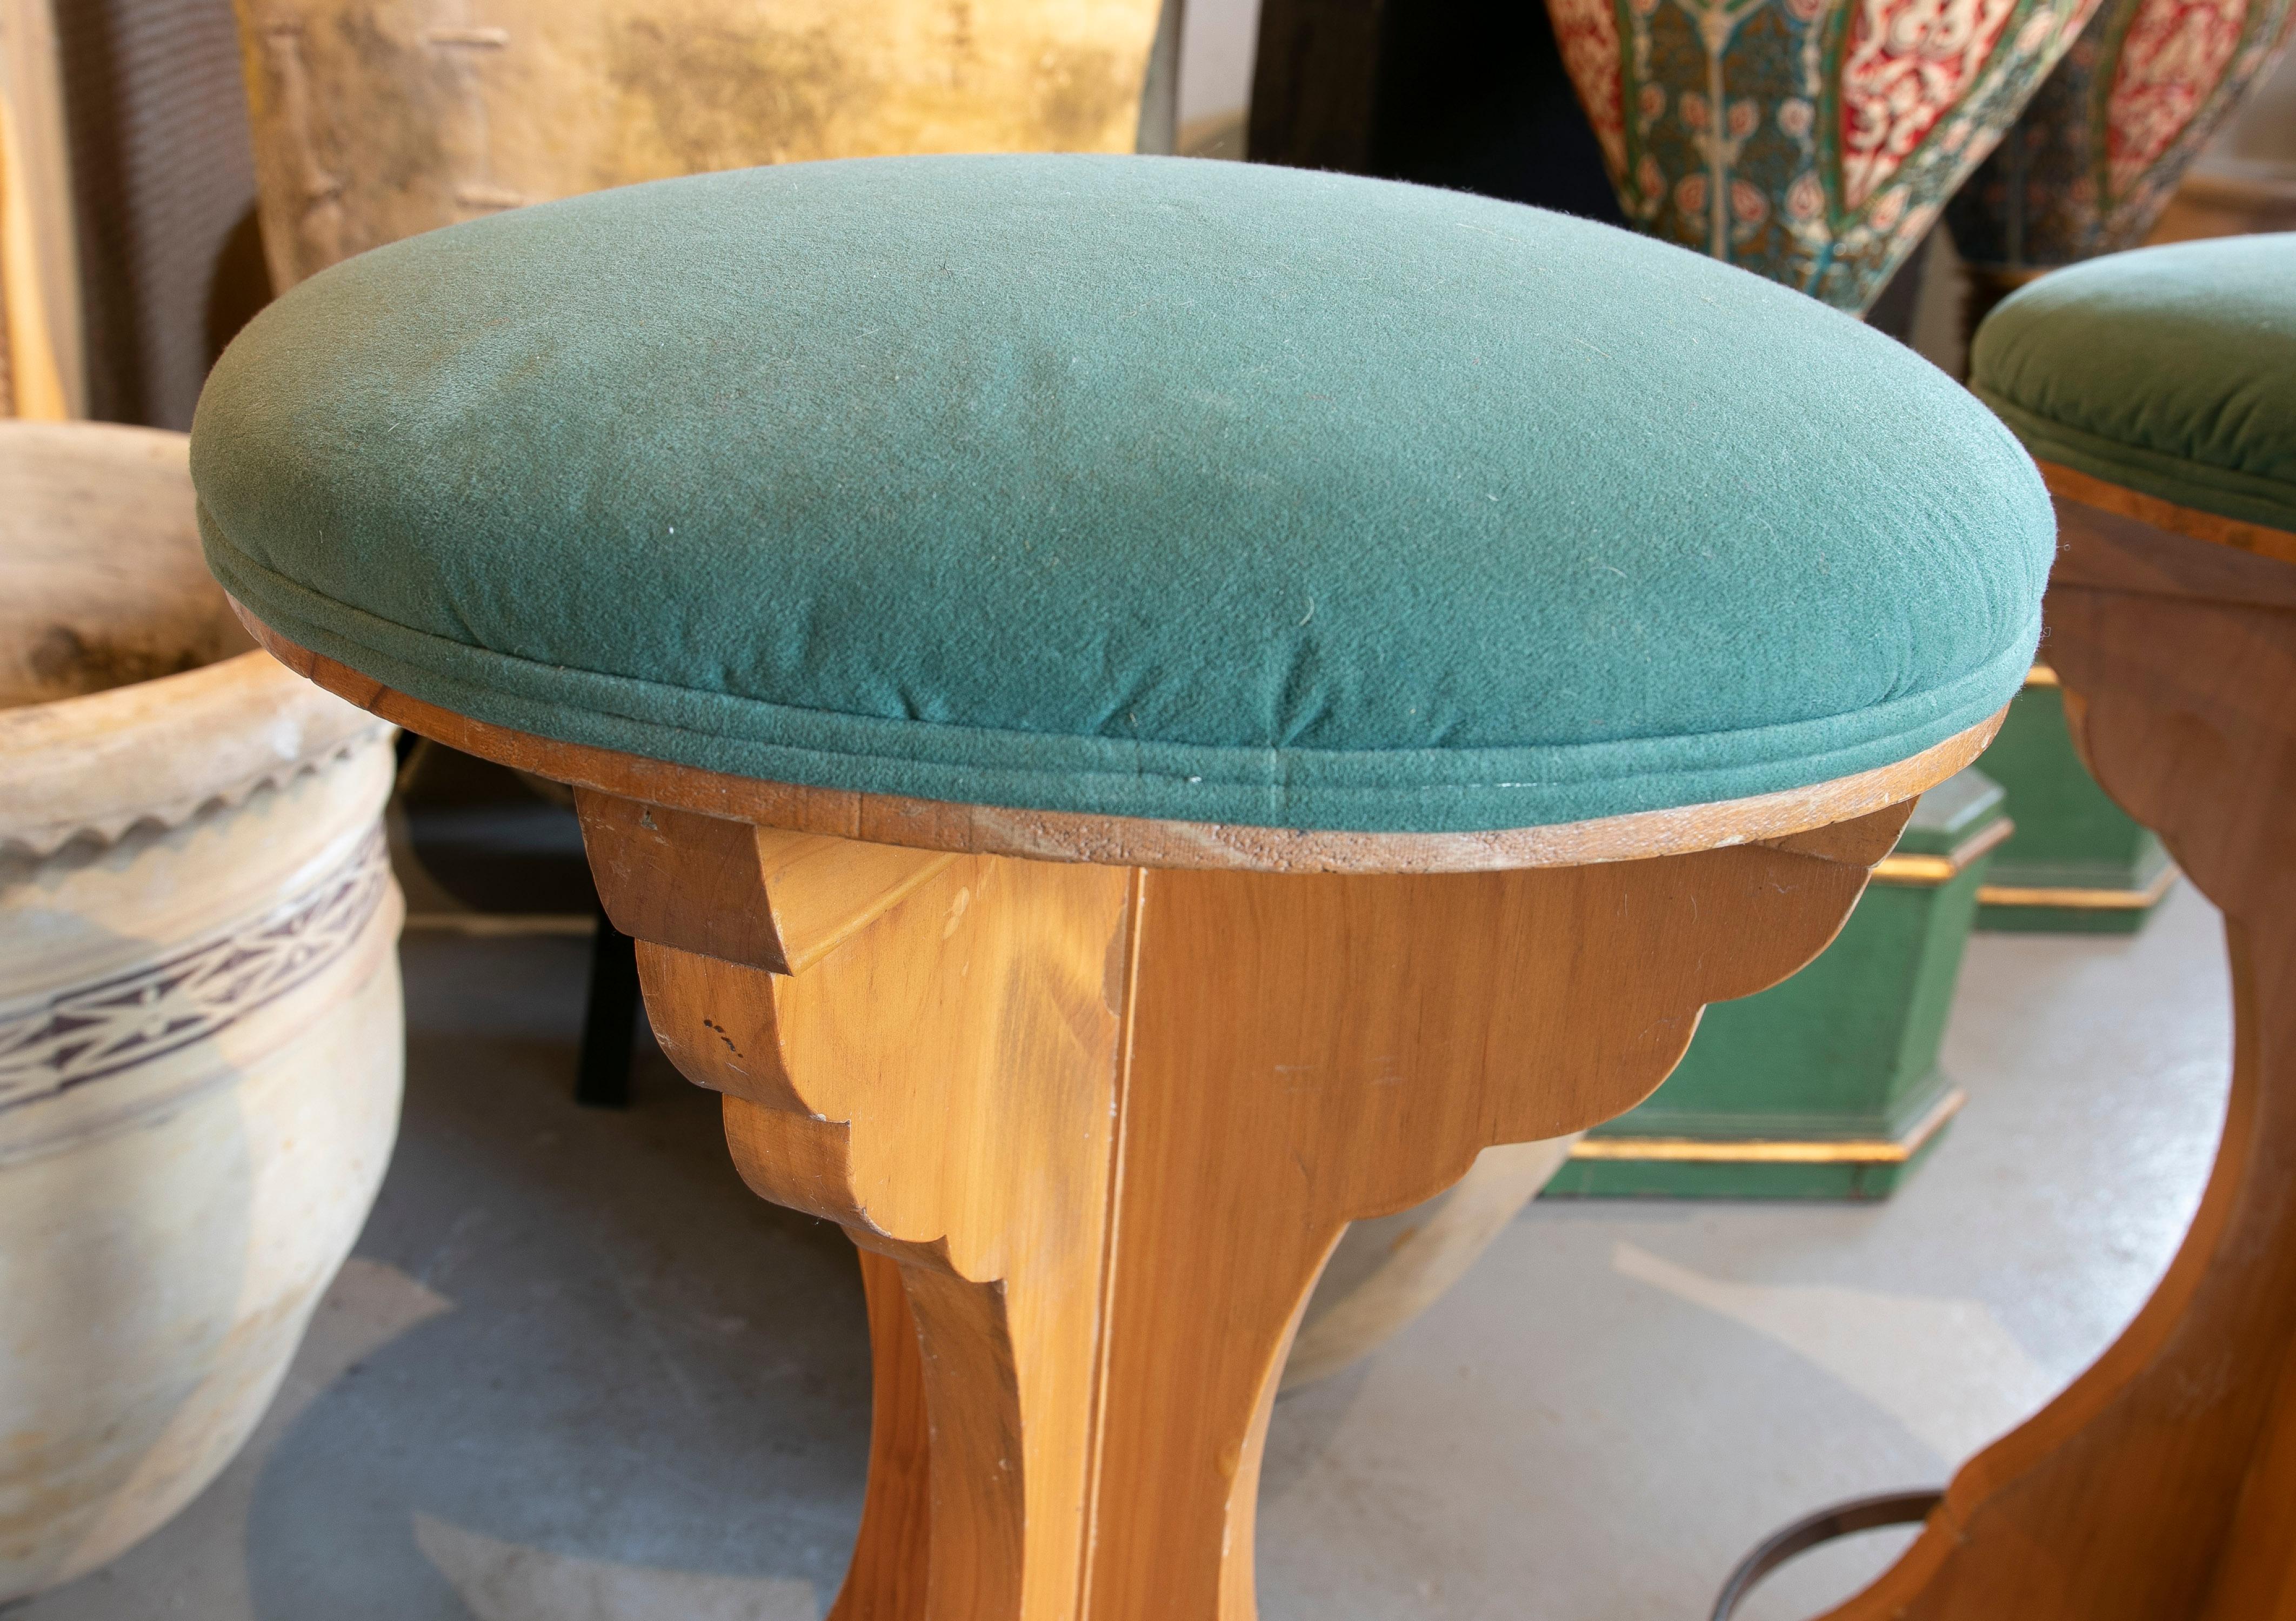 Pair of 1980s Spanish Wooden Stools with Teal Upholstered Seats For Sale 9